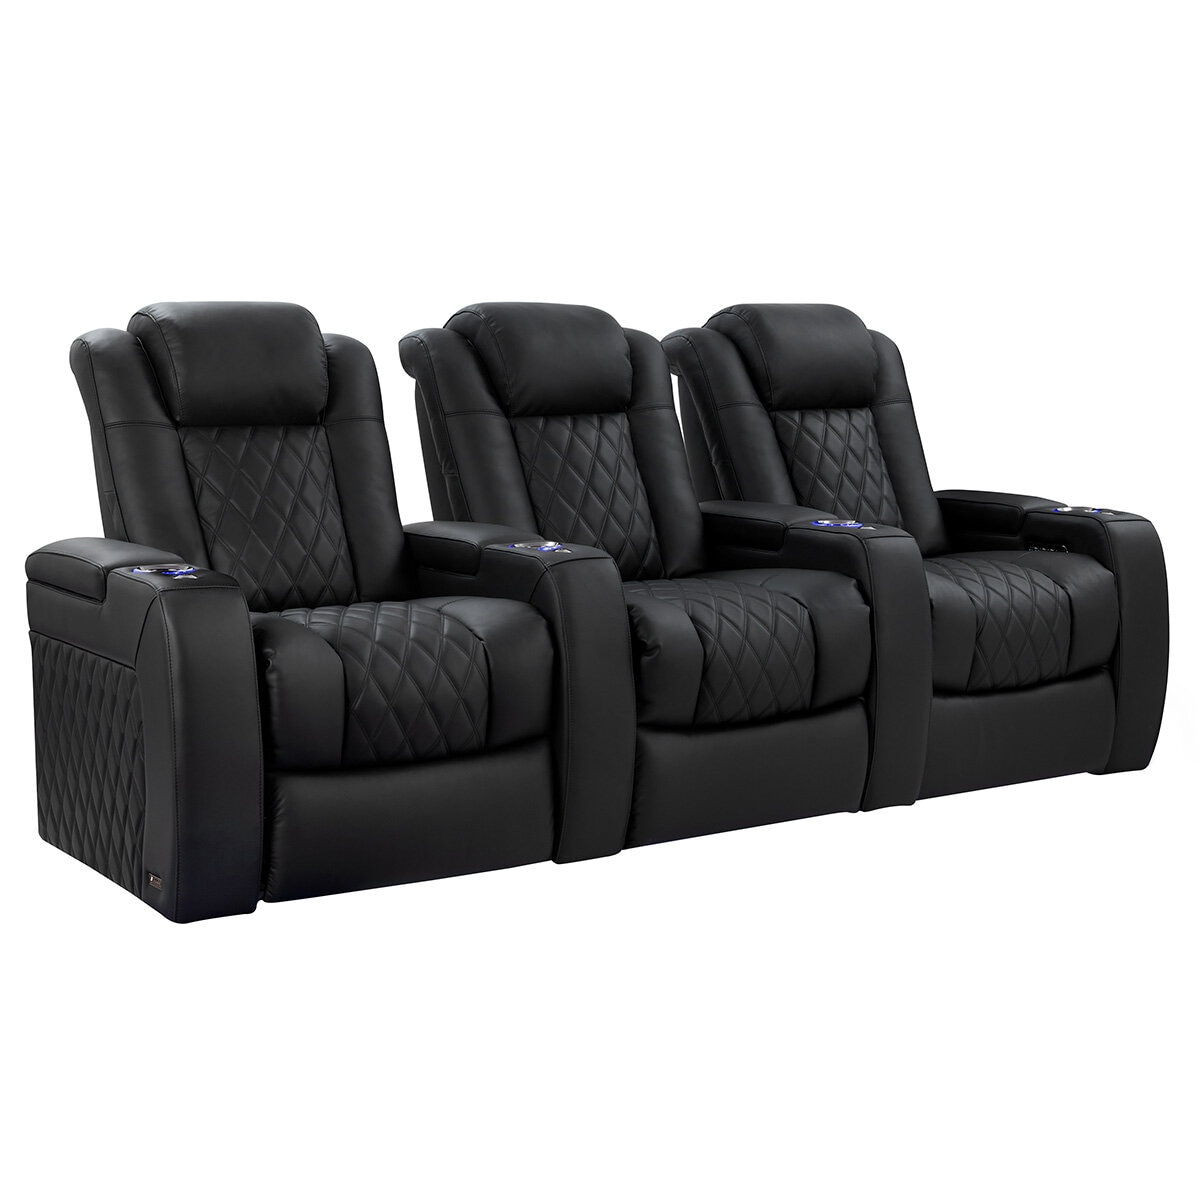 Tuscany Lux 3 Seater